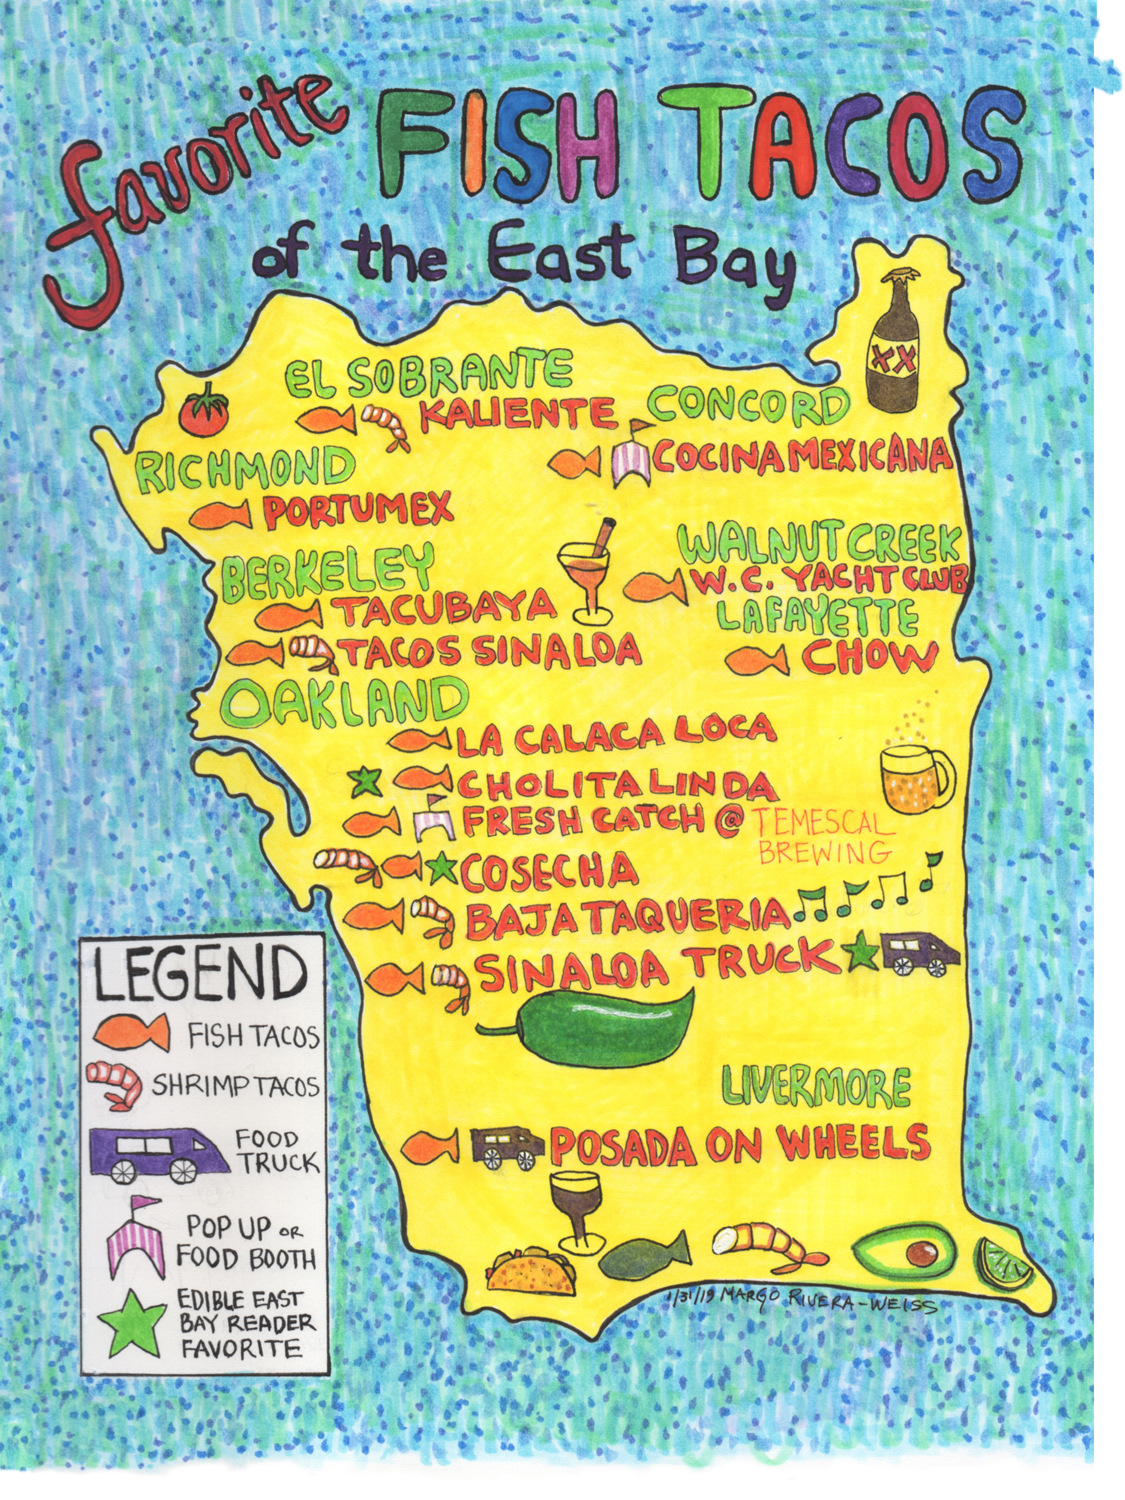 Staff illustrator Margo Rivera-Weiss makes food-related art and draws daily. Connect with them at margoriveraweiss.com, or on Facebook at Margo Rivera-Weiss - Art or East Bay Sketchers.
